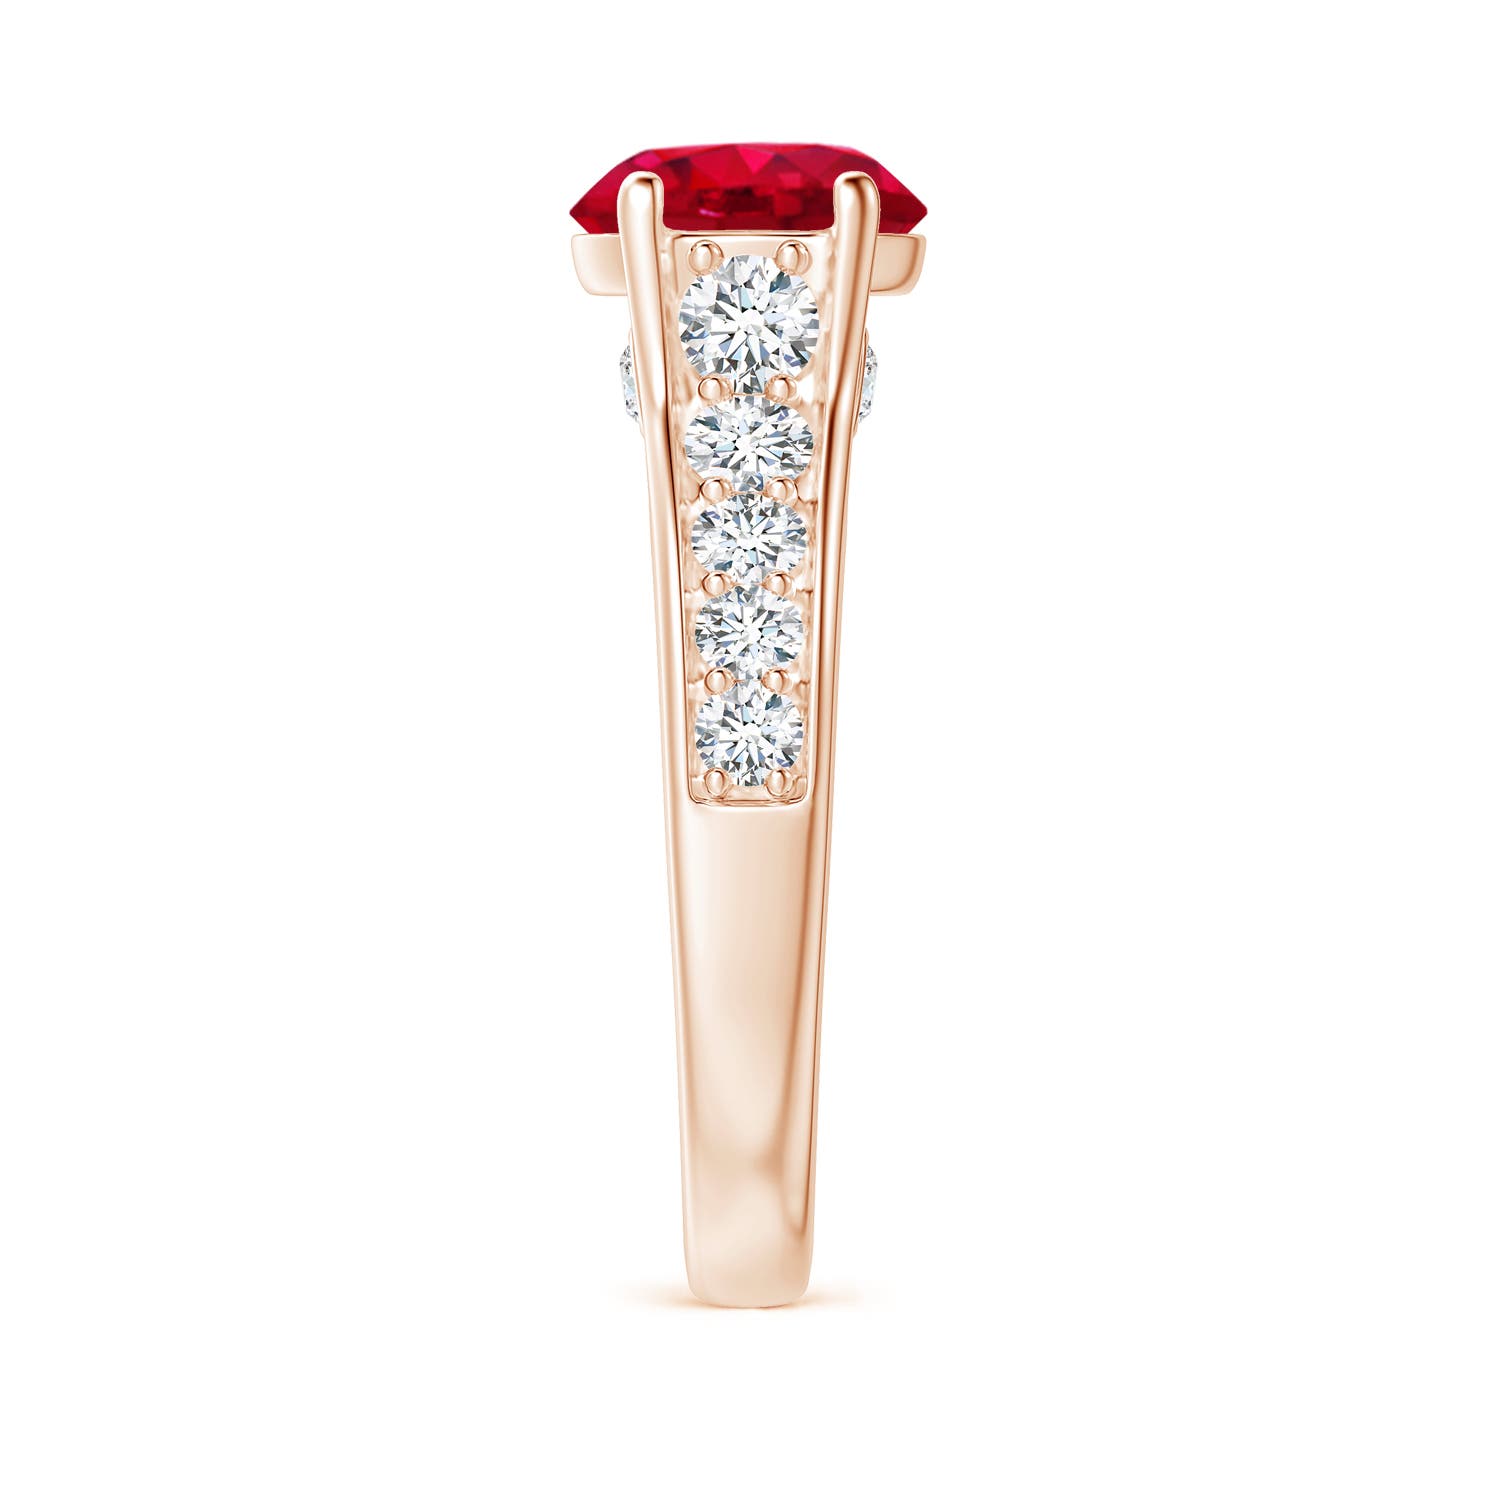 AAA - Ruby / 2.8 CT / 14 KT Rose Gold